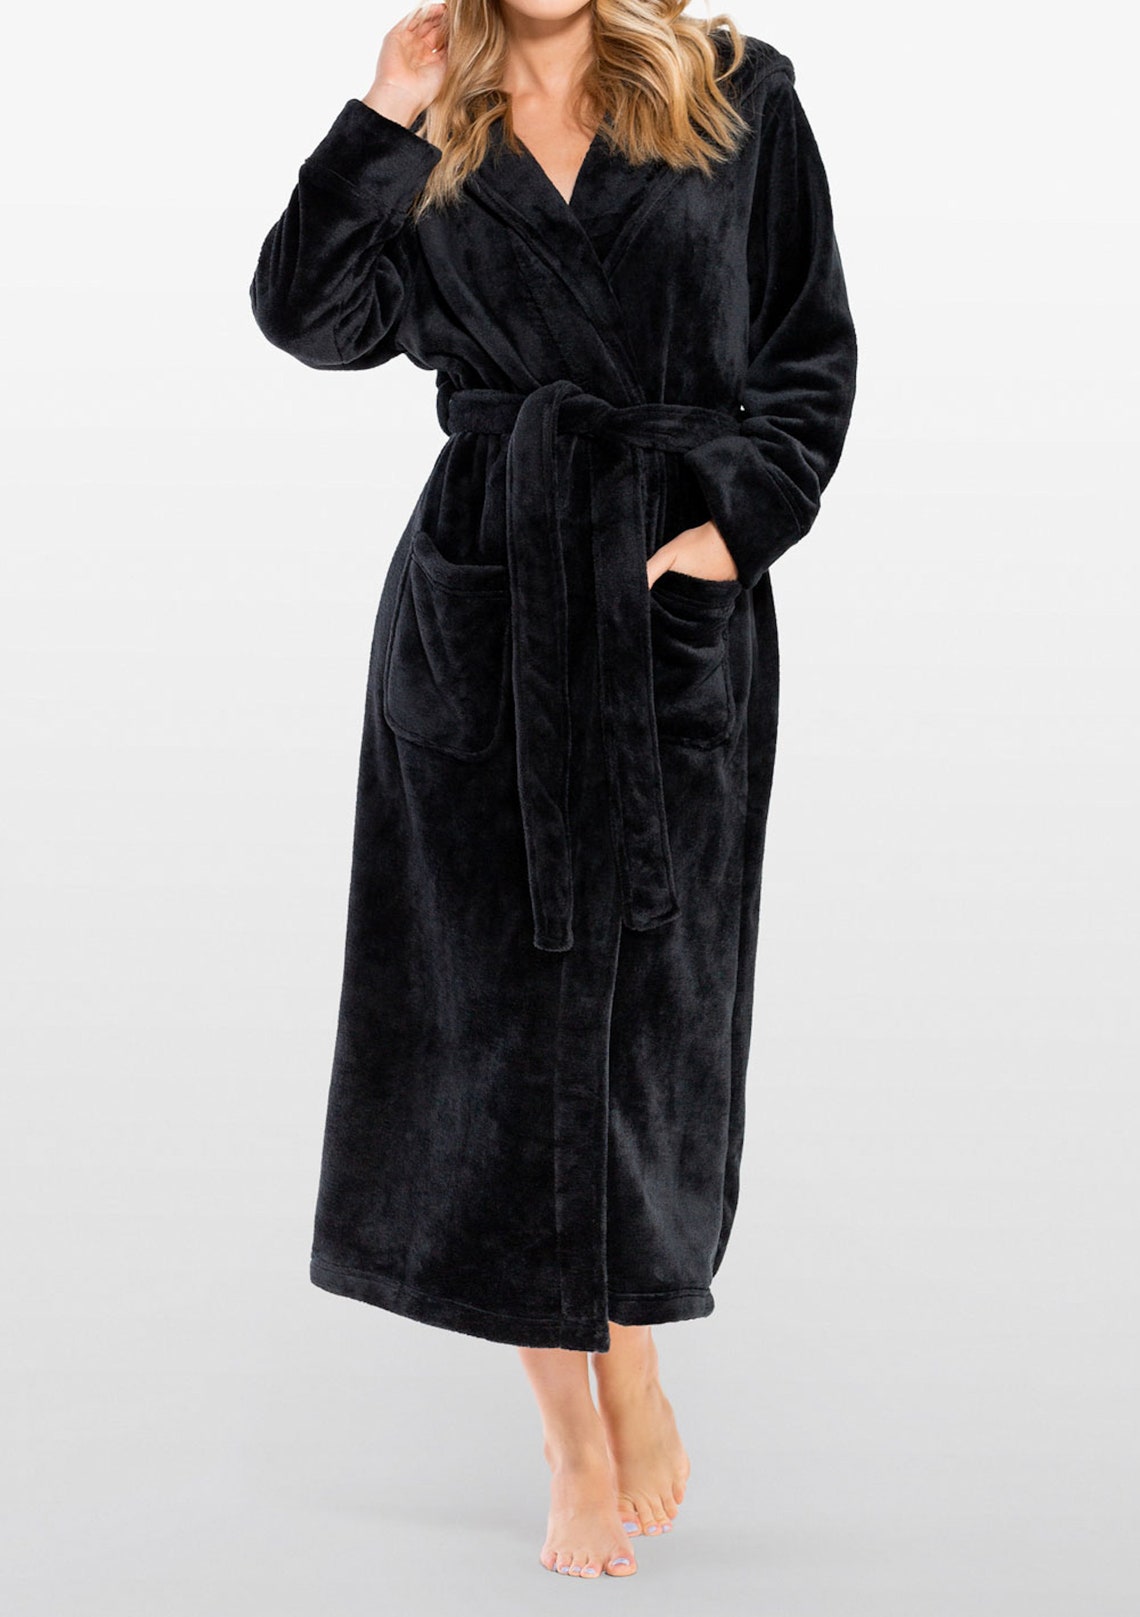 Black Personalized Premium Hooded Plush Robe for Men and Women - Etsy